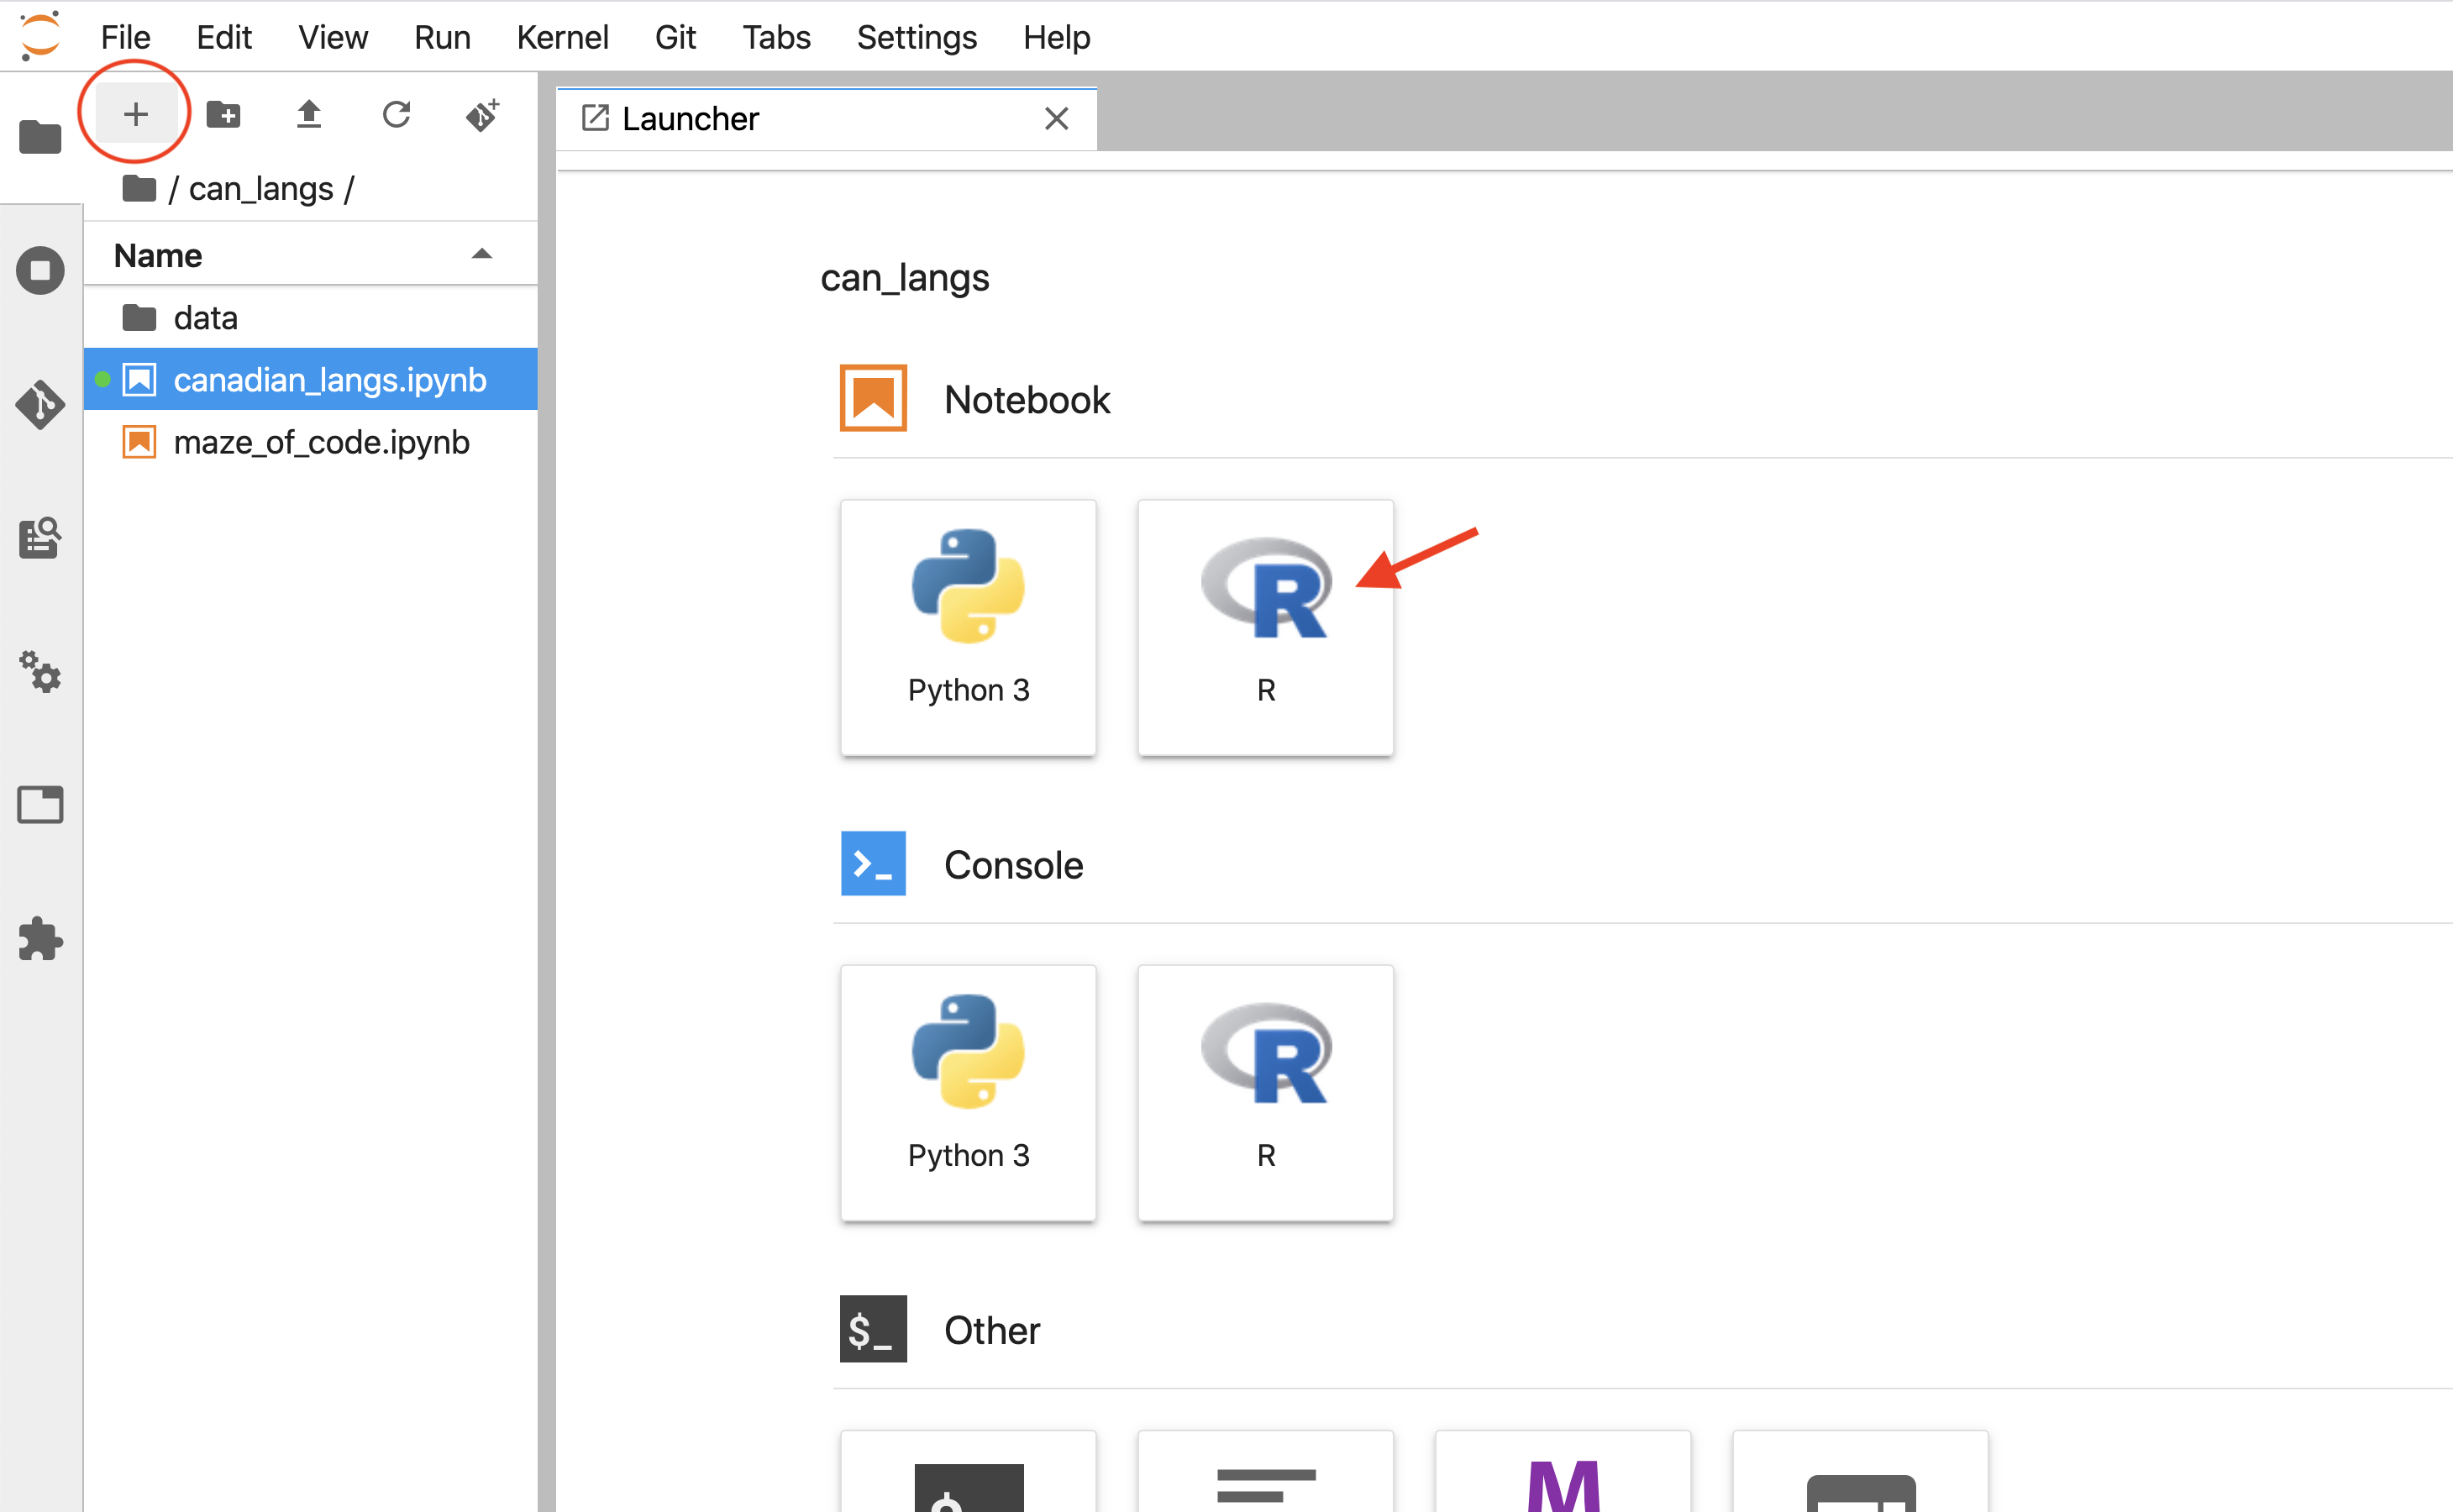 Clicking on the R icon under the Notebook heading will create a new Jupyter notebook with an R kernel.